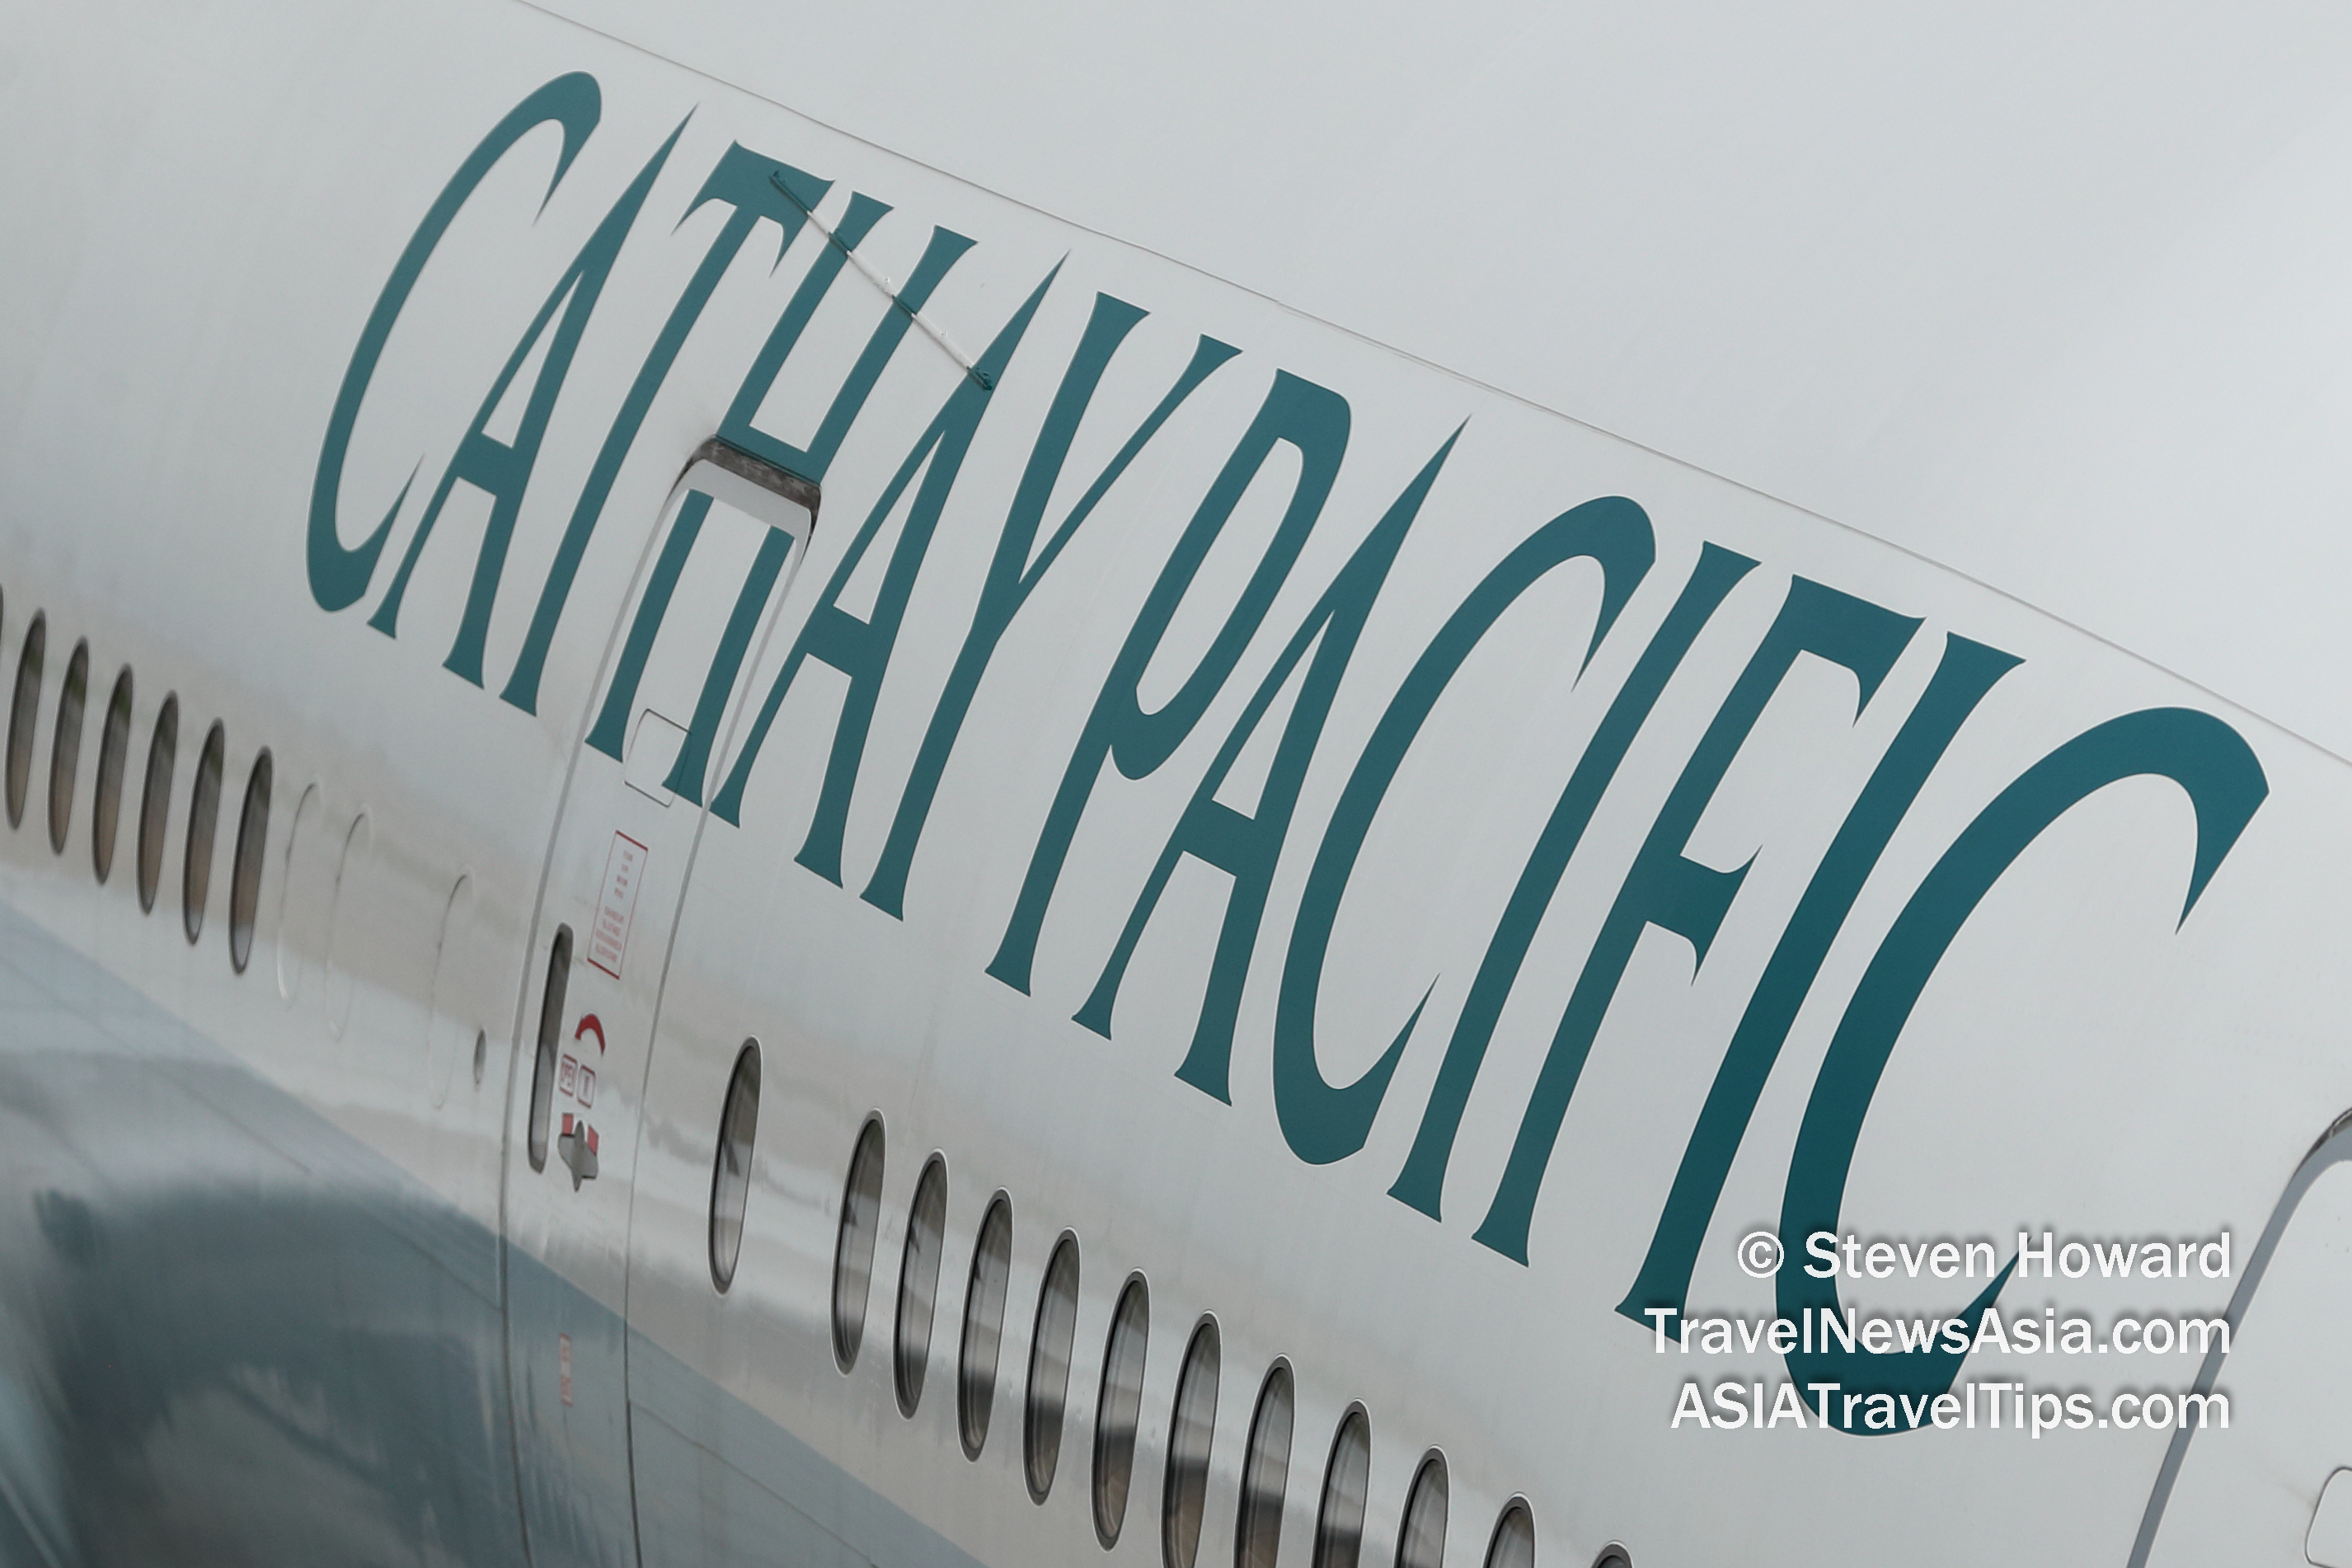 Cathay Pacific livery. Picture by Steven Howard of TravelNewsAsia.com Click to enlarge.